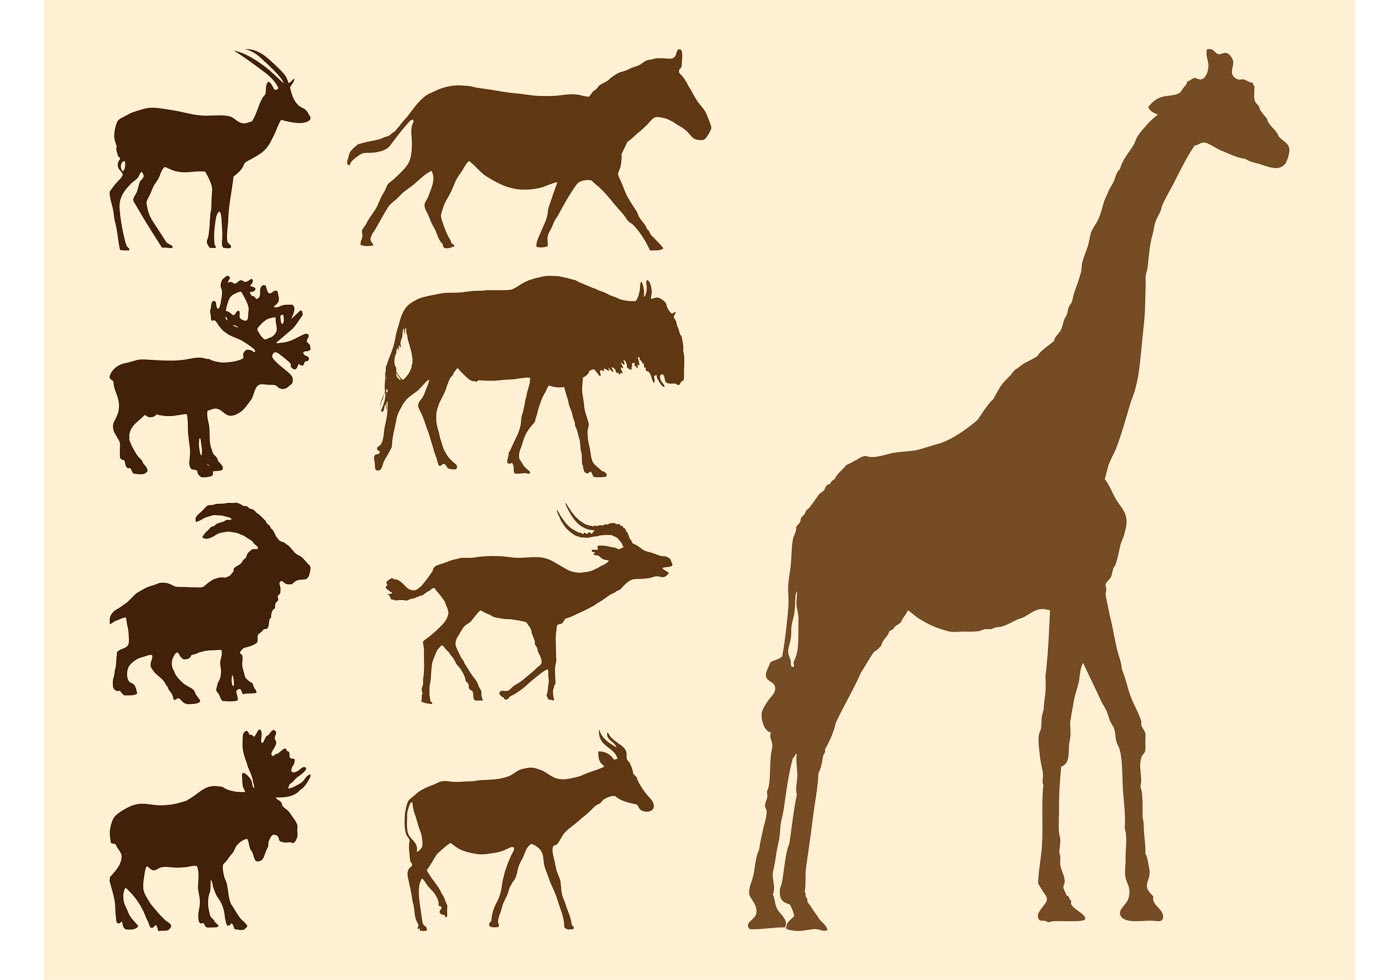 Download Wild Animals Silhouettes Set - Download Free Vector Art, Stock Graphics & Images